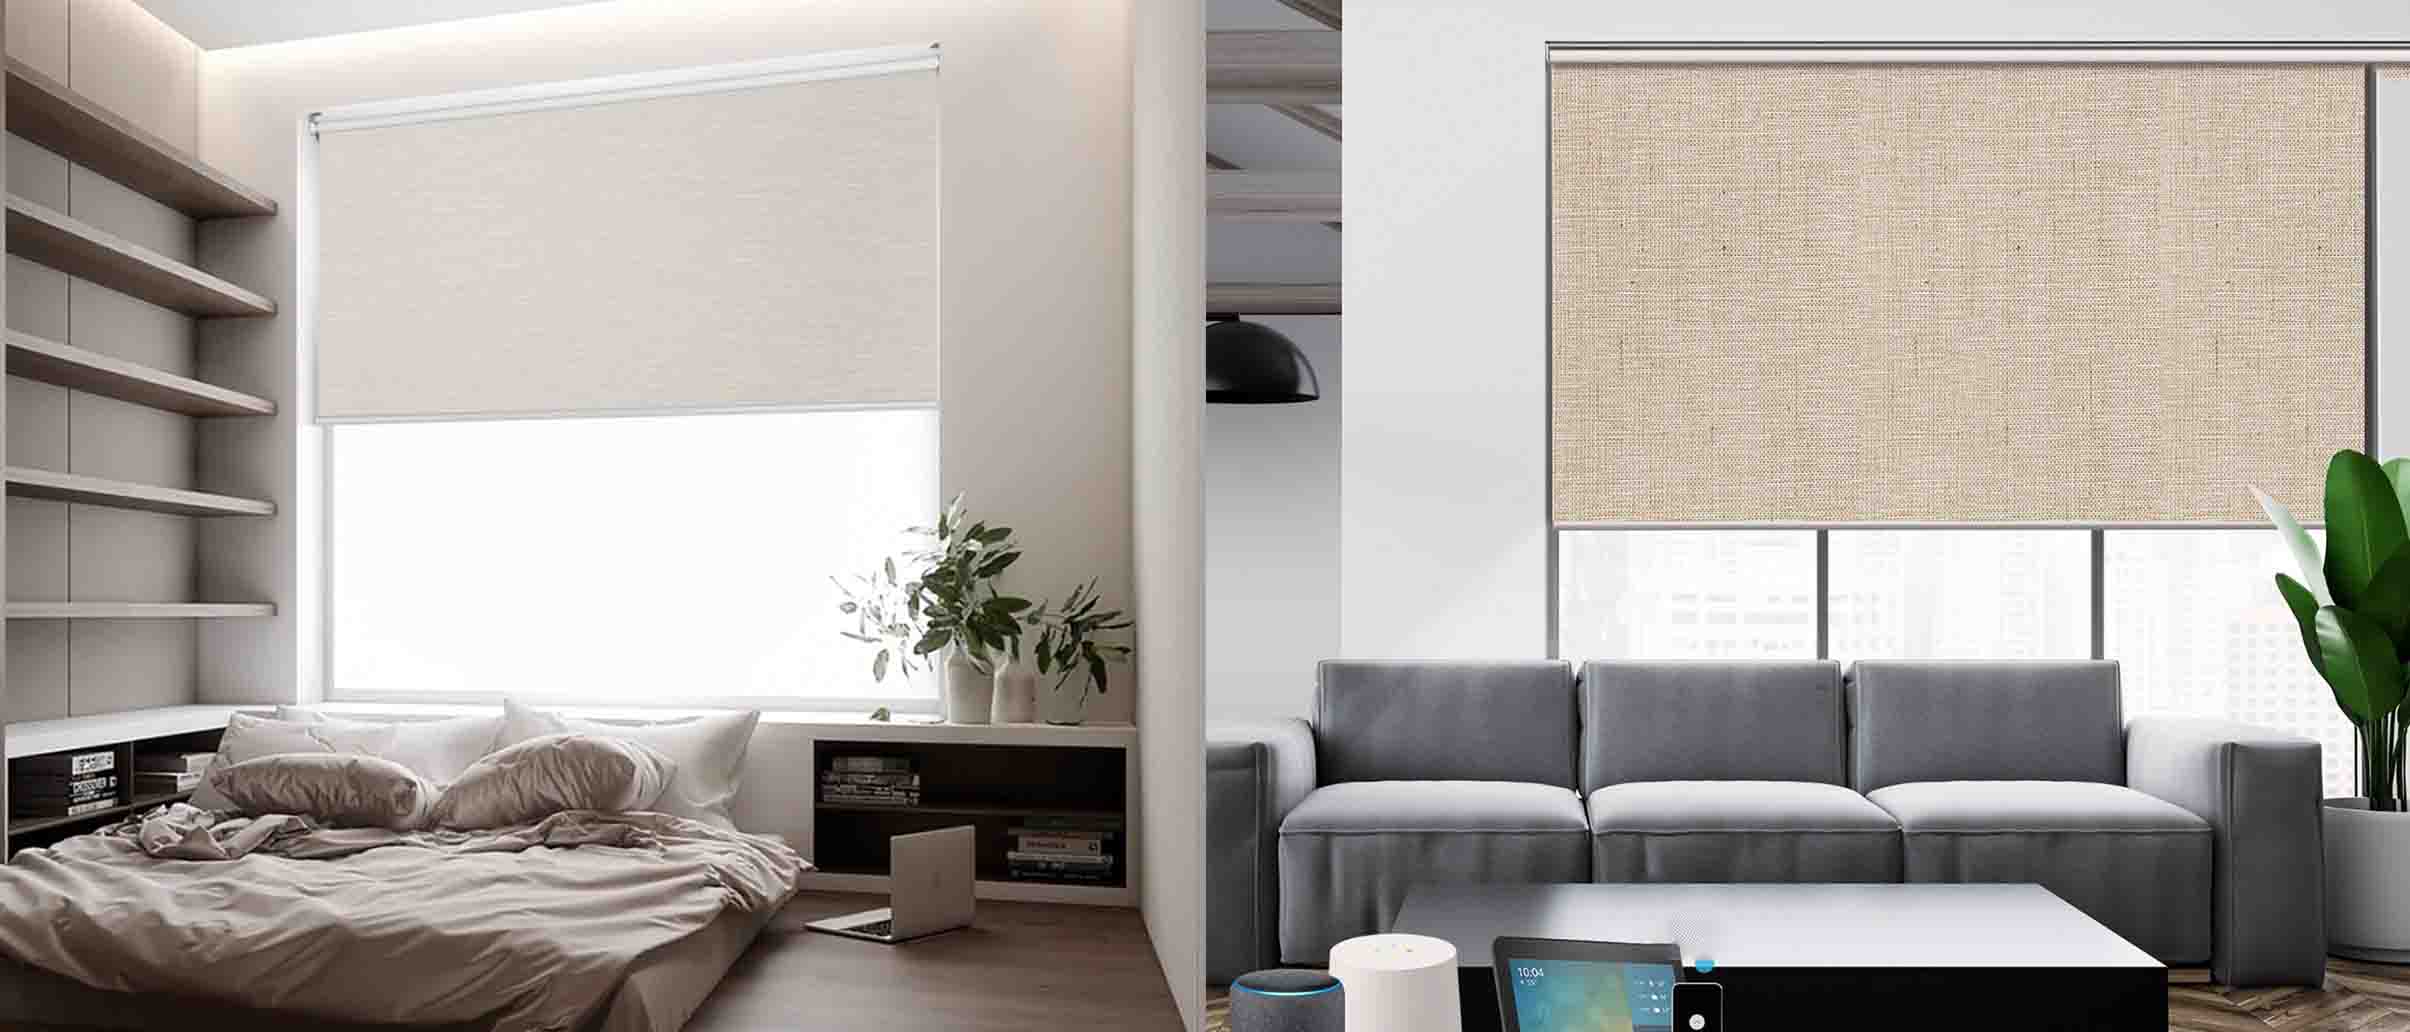 Side by side picture of shades in bedroom and living room